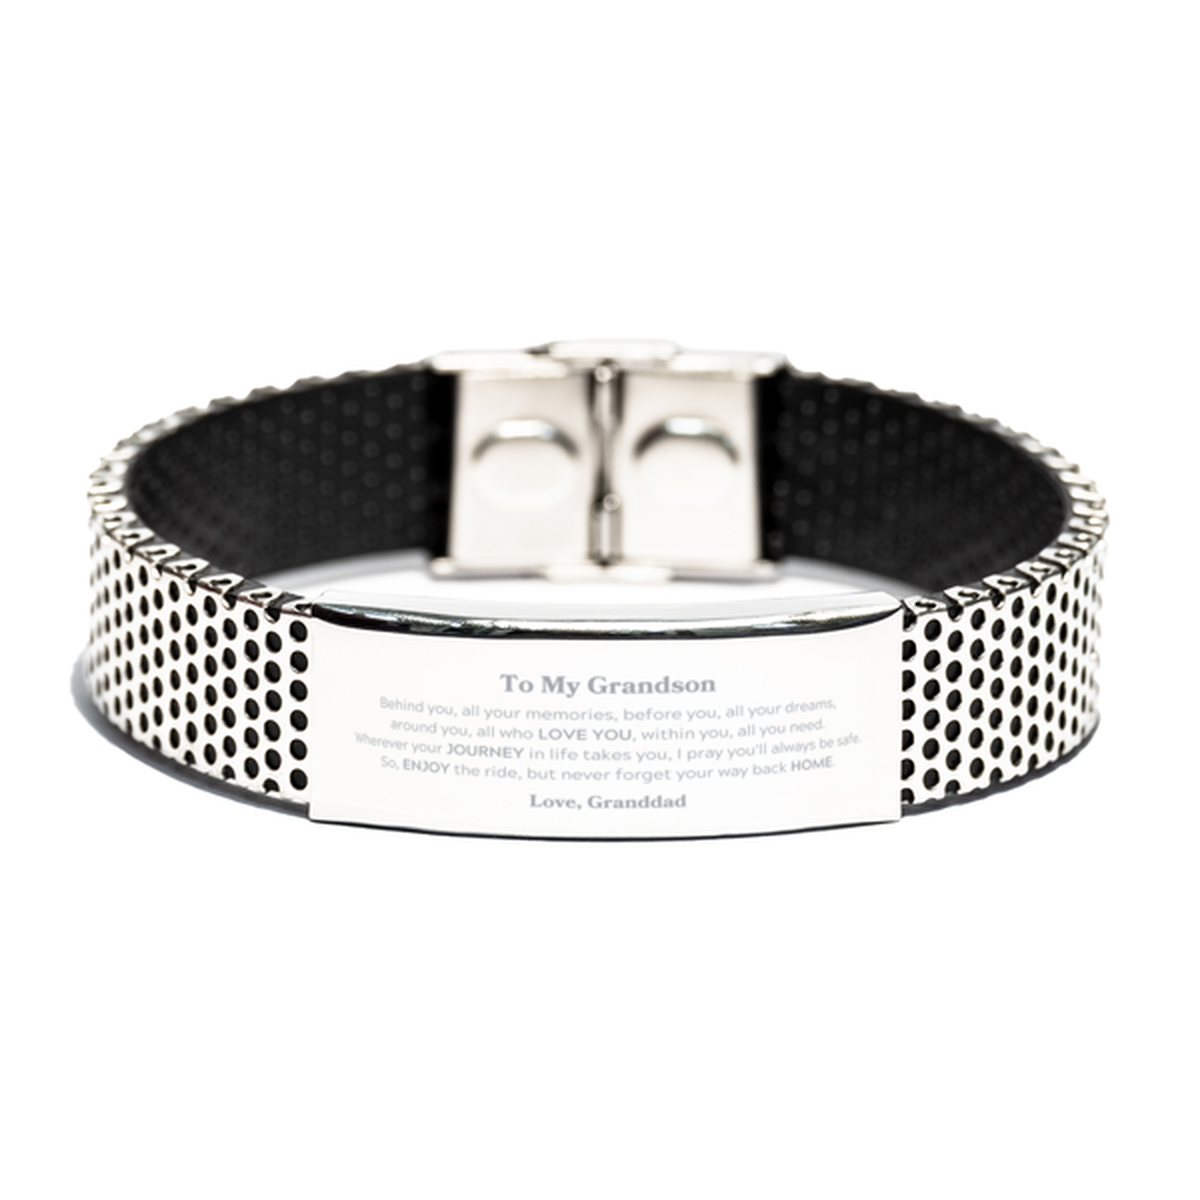 To My Grandson Graduation Gifts from Granddad, Grandson Stainless Steel Bracelet Christmas Birthday Gifts for Grandson Behind you, all your memories, before you, all your dreams. Love, Granddad